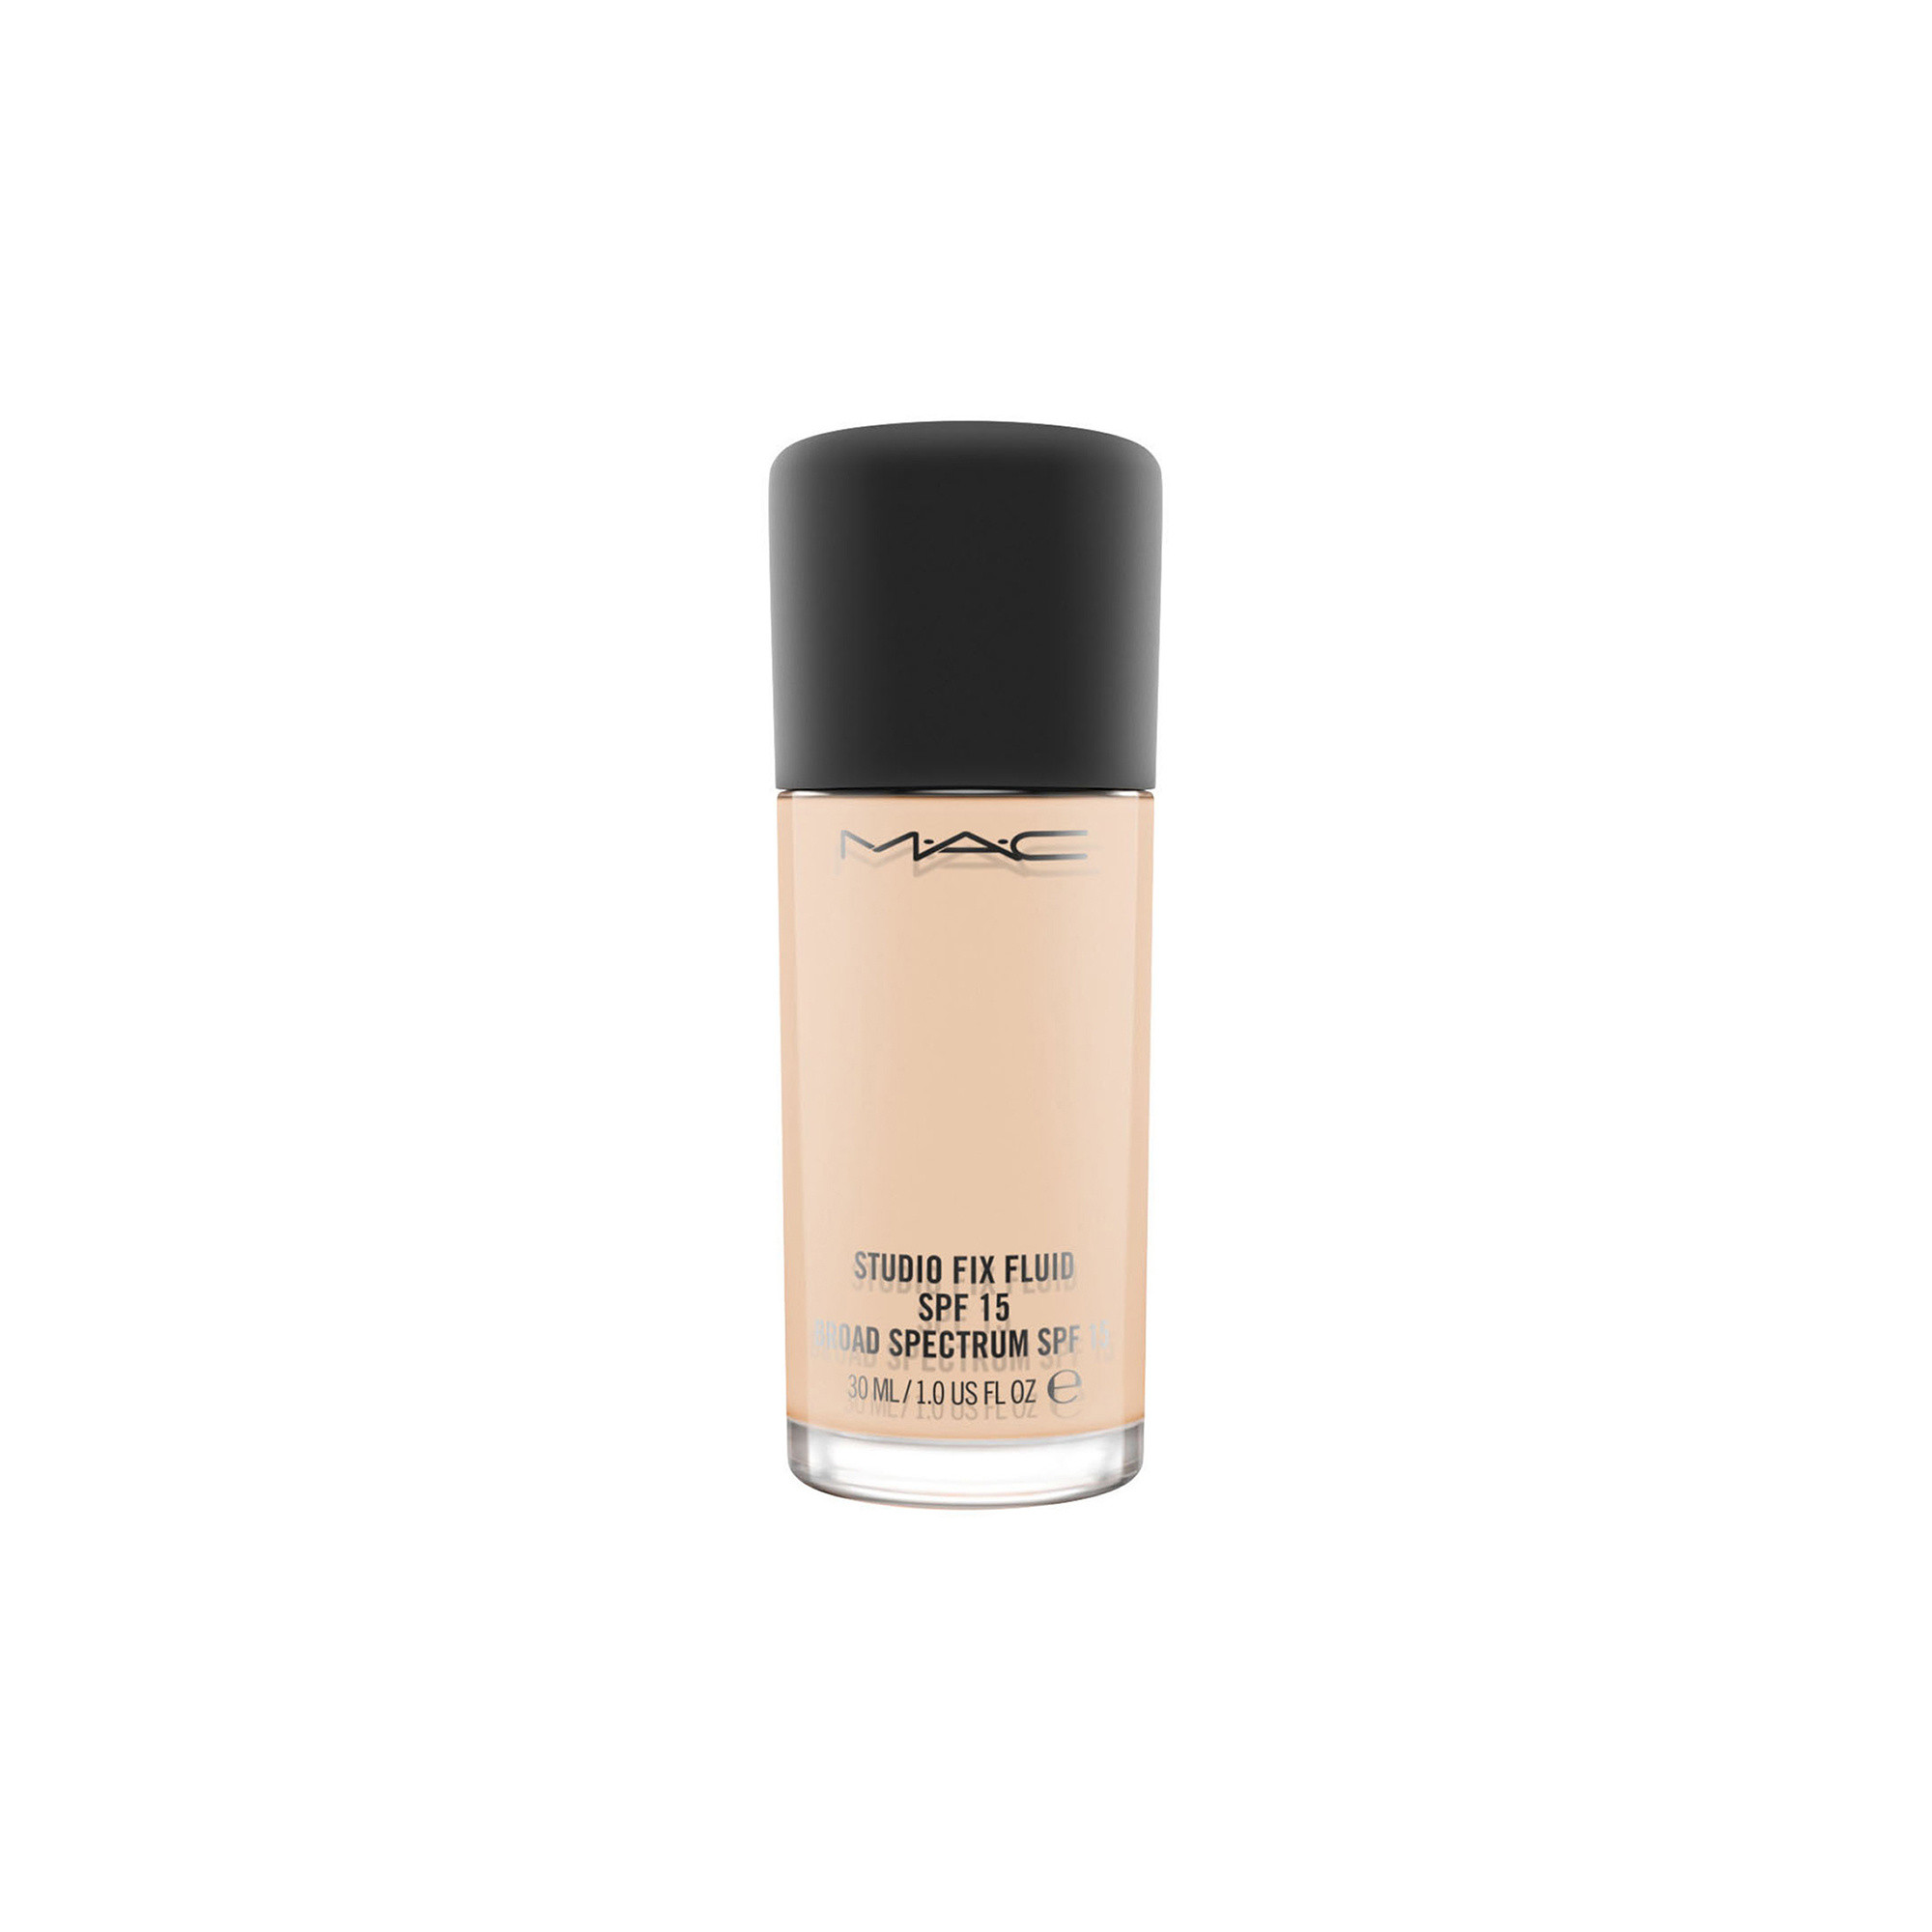 Studio Fix Fluid Foundation Spf15 - NW13, NW13, large image number 0